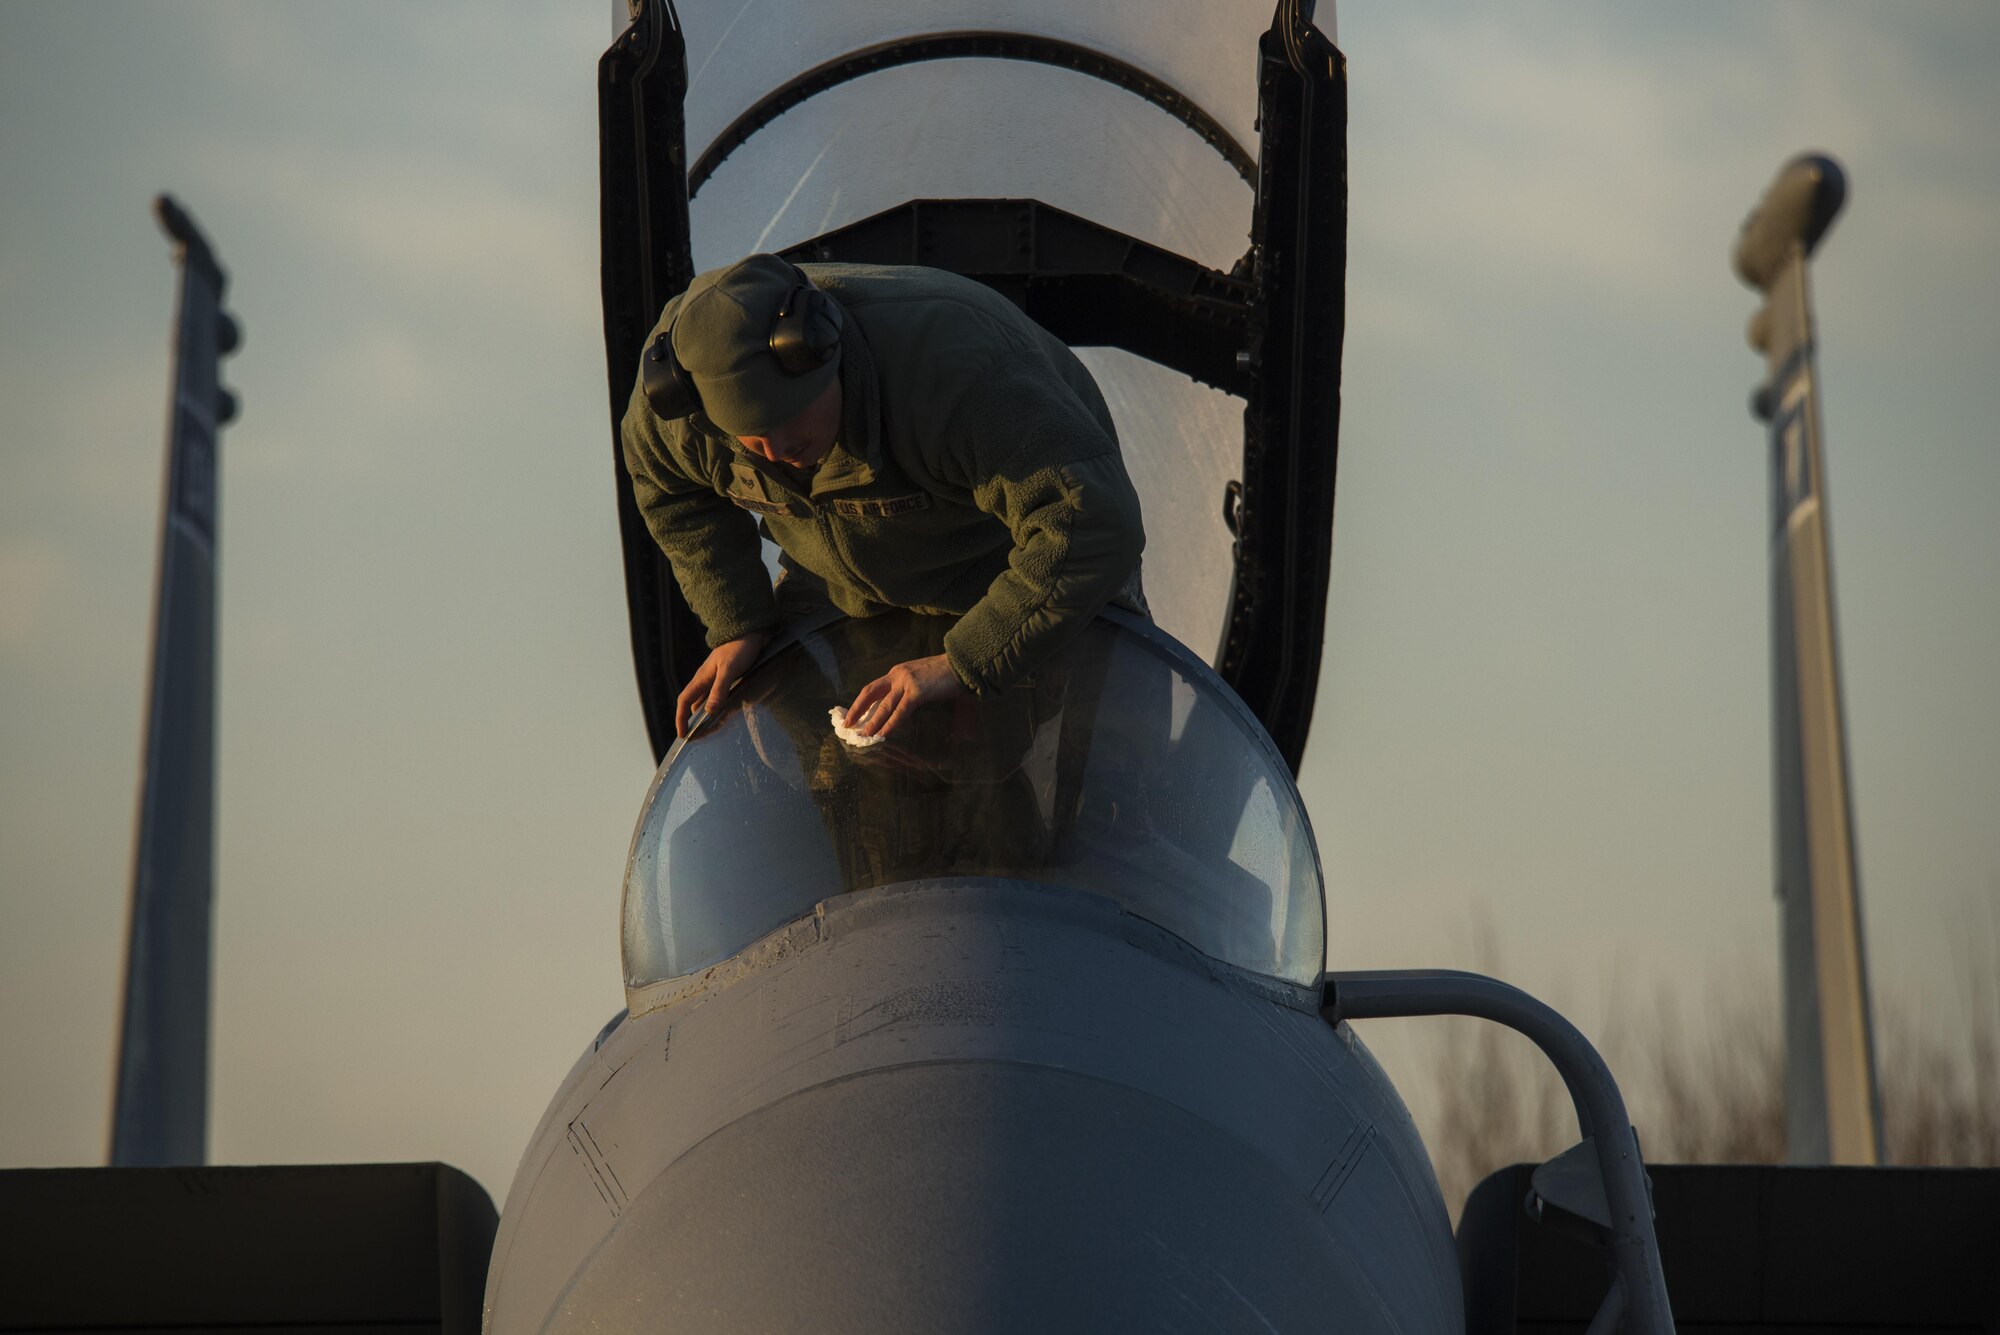 Staff Sgt. Joshua Matrine, 159th Aircraft Maintenance Squadron crew chief, cleans the canopy on a F-15C Eagle from the Louisiana Air National Guard at Leeuwarden Air Base, Netherlands, March 28, 2017. The 122nd Expeditionary Fighter Squadron, comprised of Louisiana and Florida Air National Guard members, will conduct training alongside NATO allies to strengthen interoperability and demonstrate U.S. commitment to the security and stability of Europe. (U.S. Air Force photo by Staff Sgt. Jonathan Snyder)